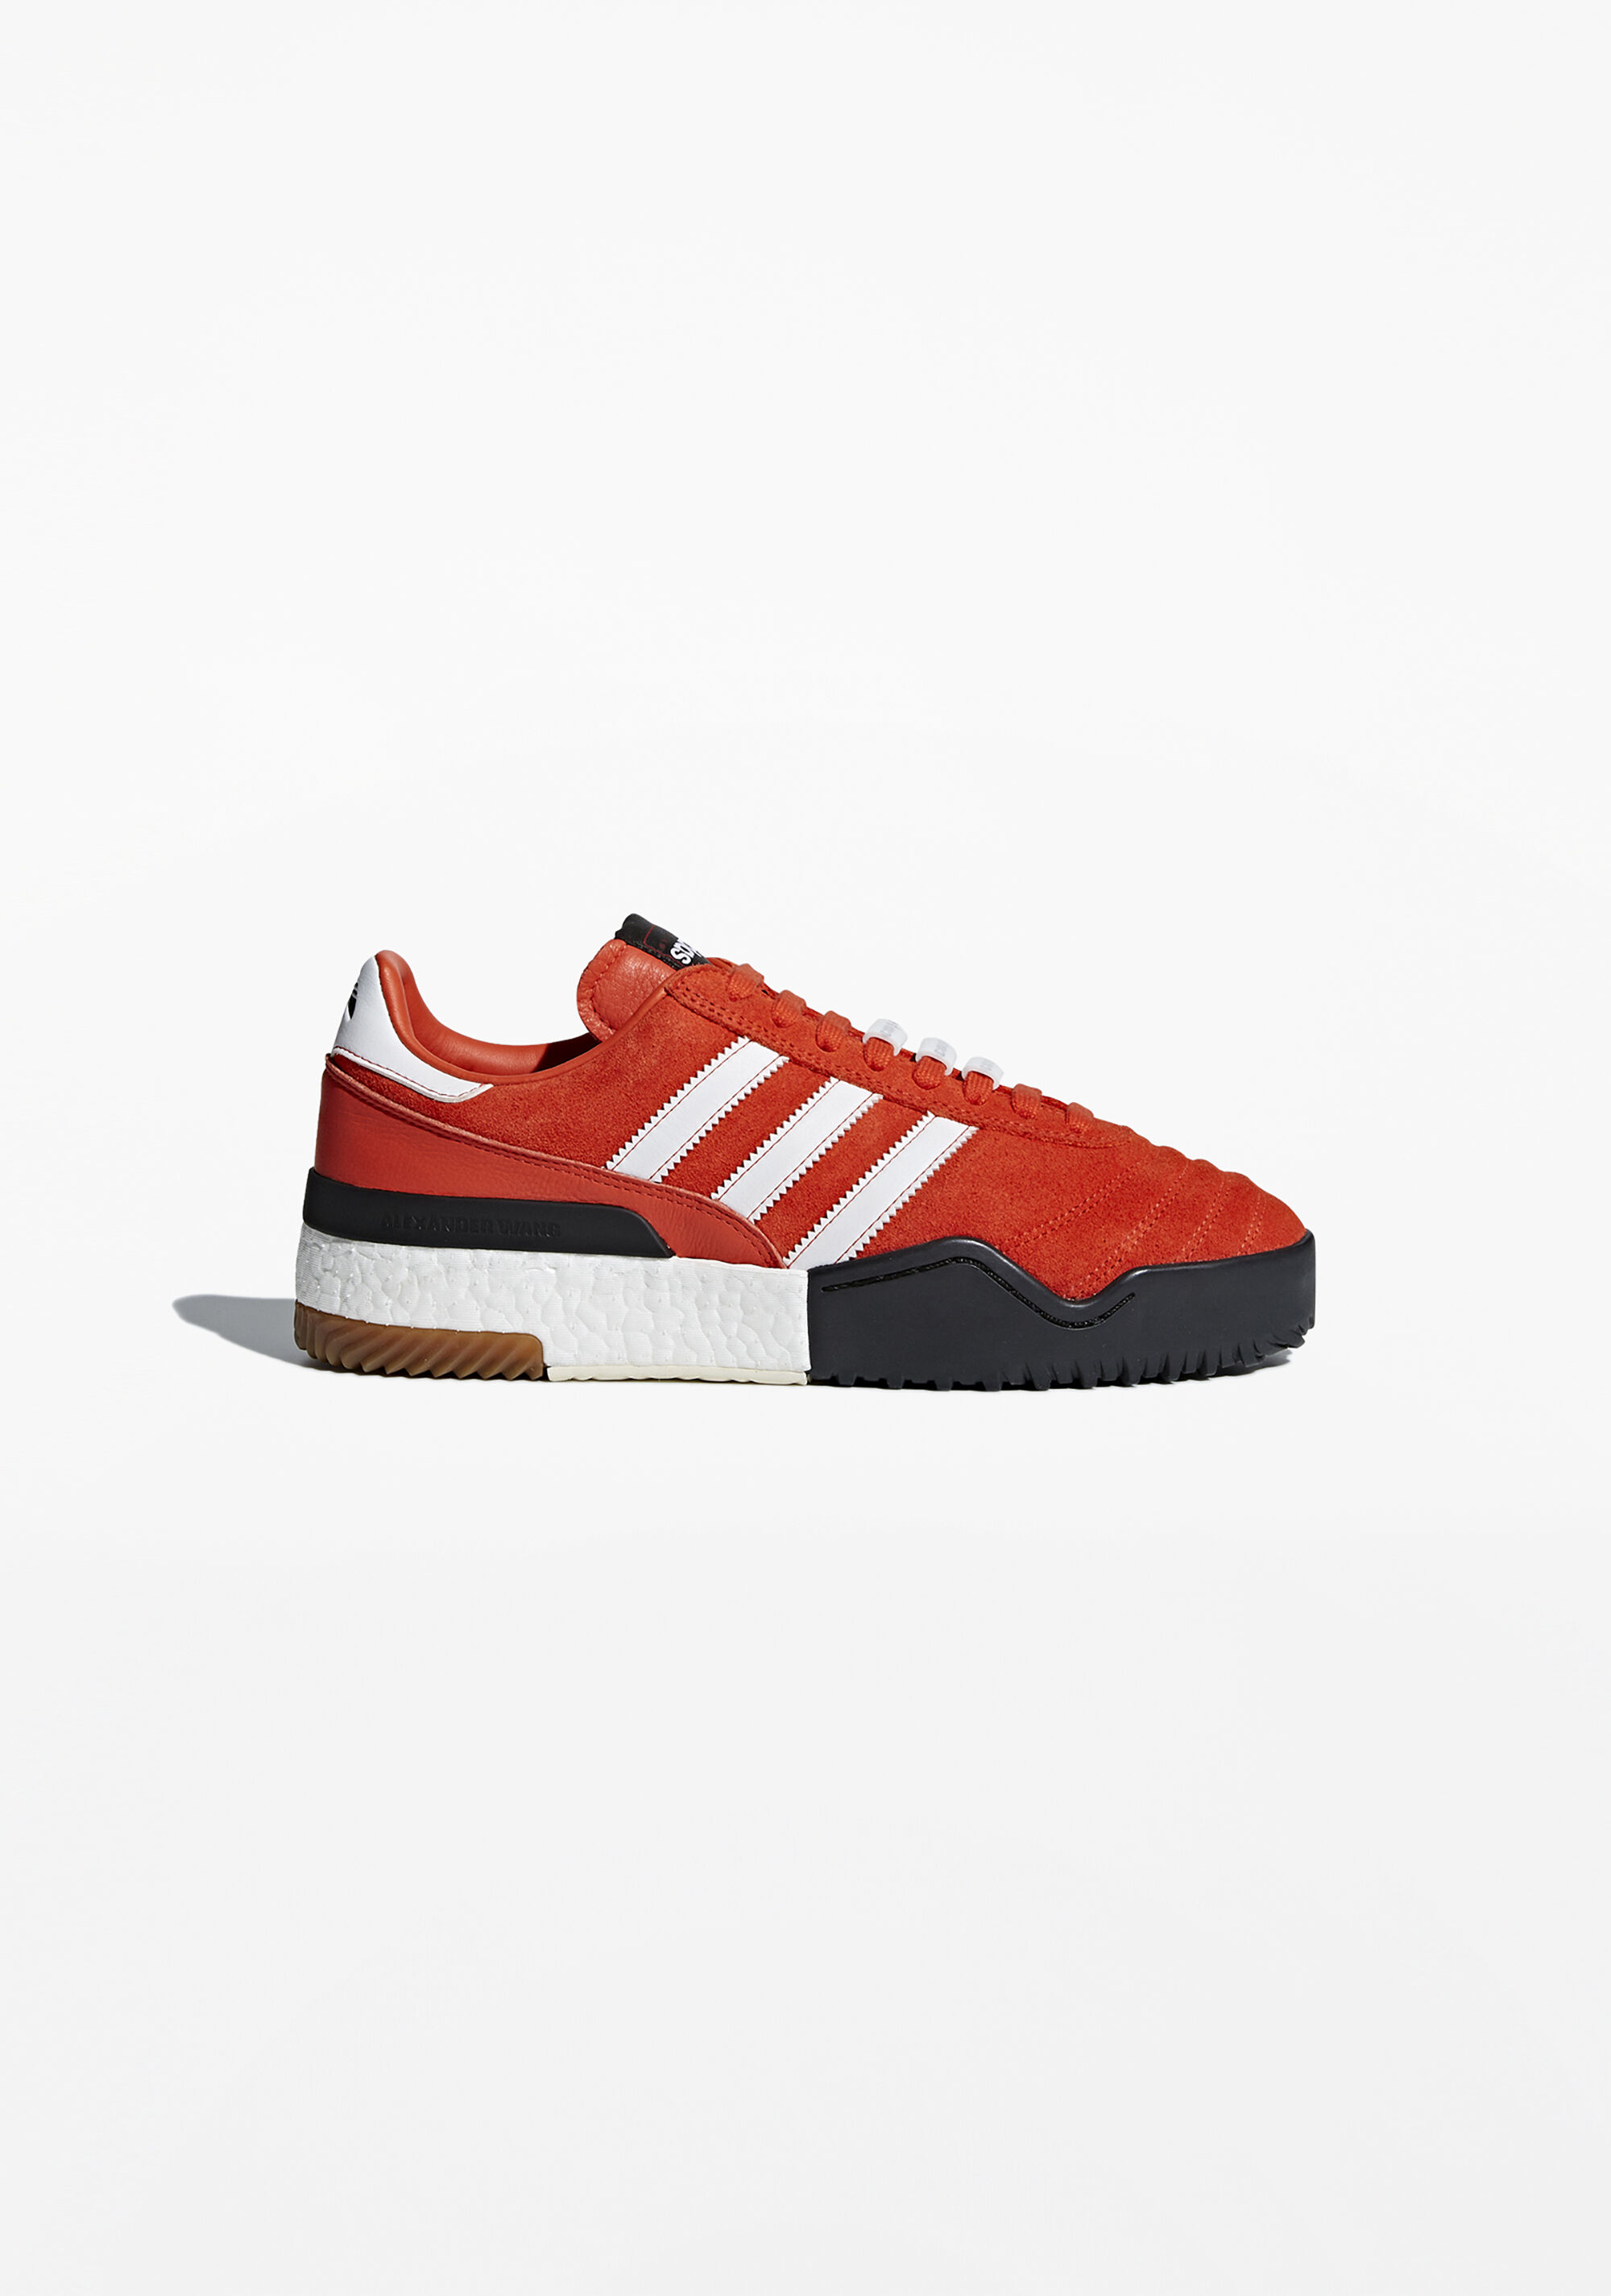 adidas originals by aw bball soccer shoes